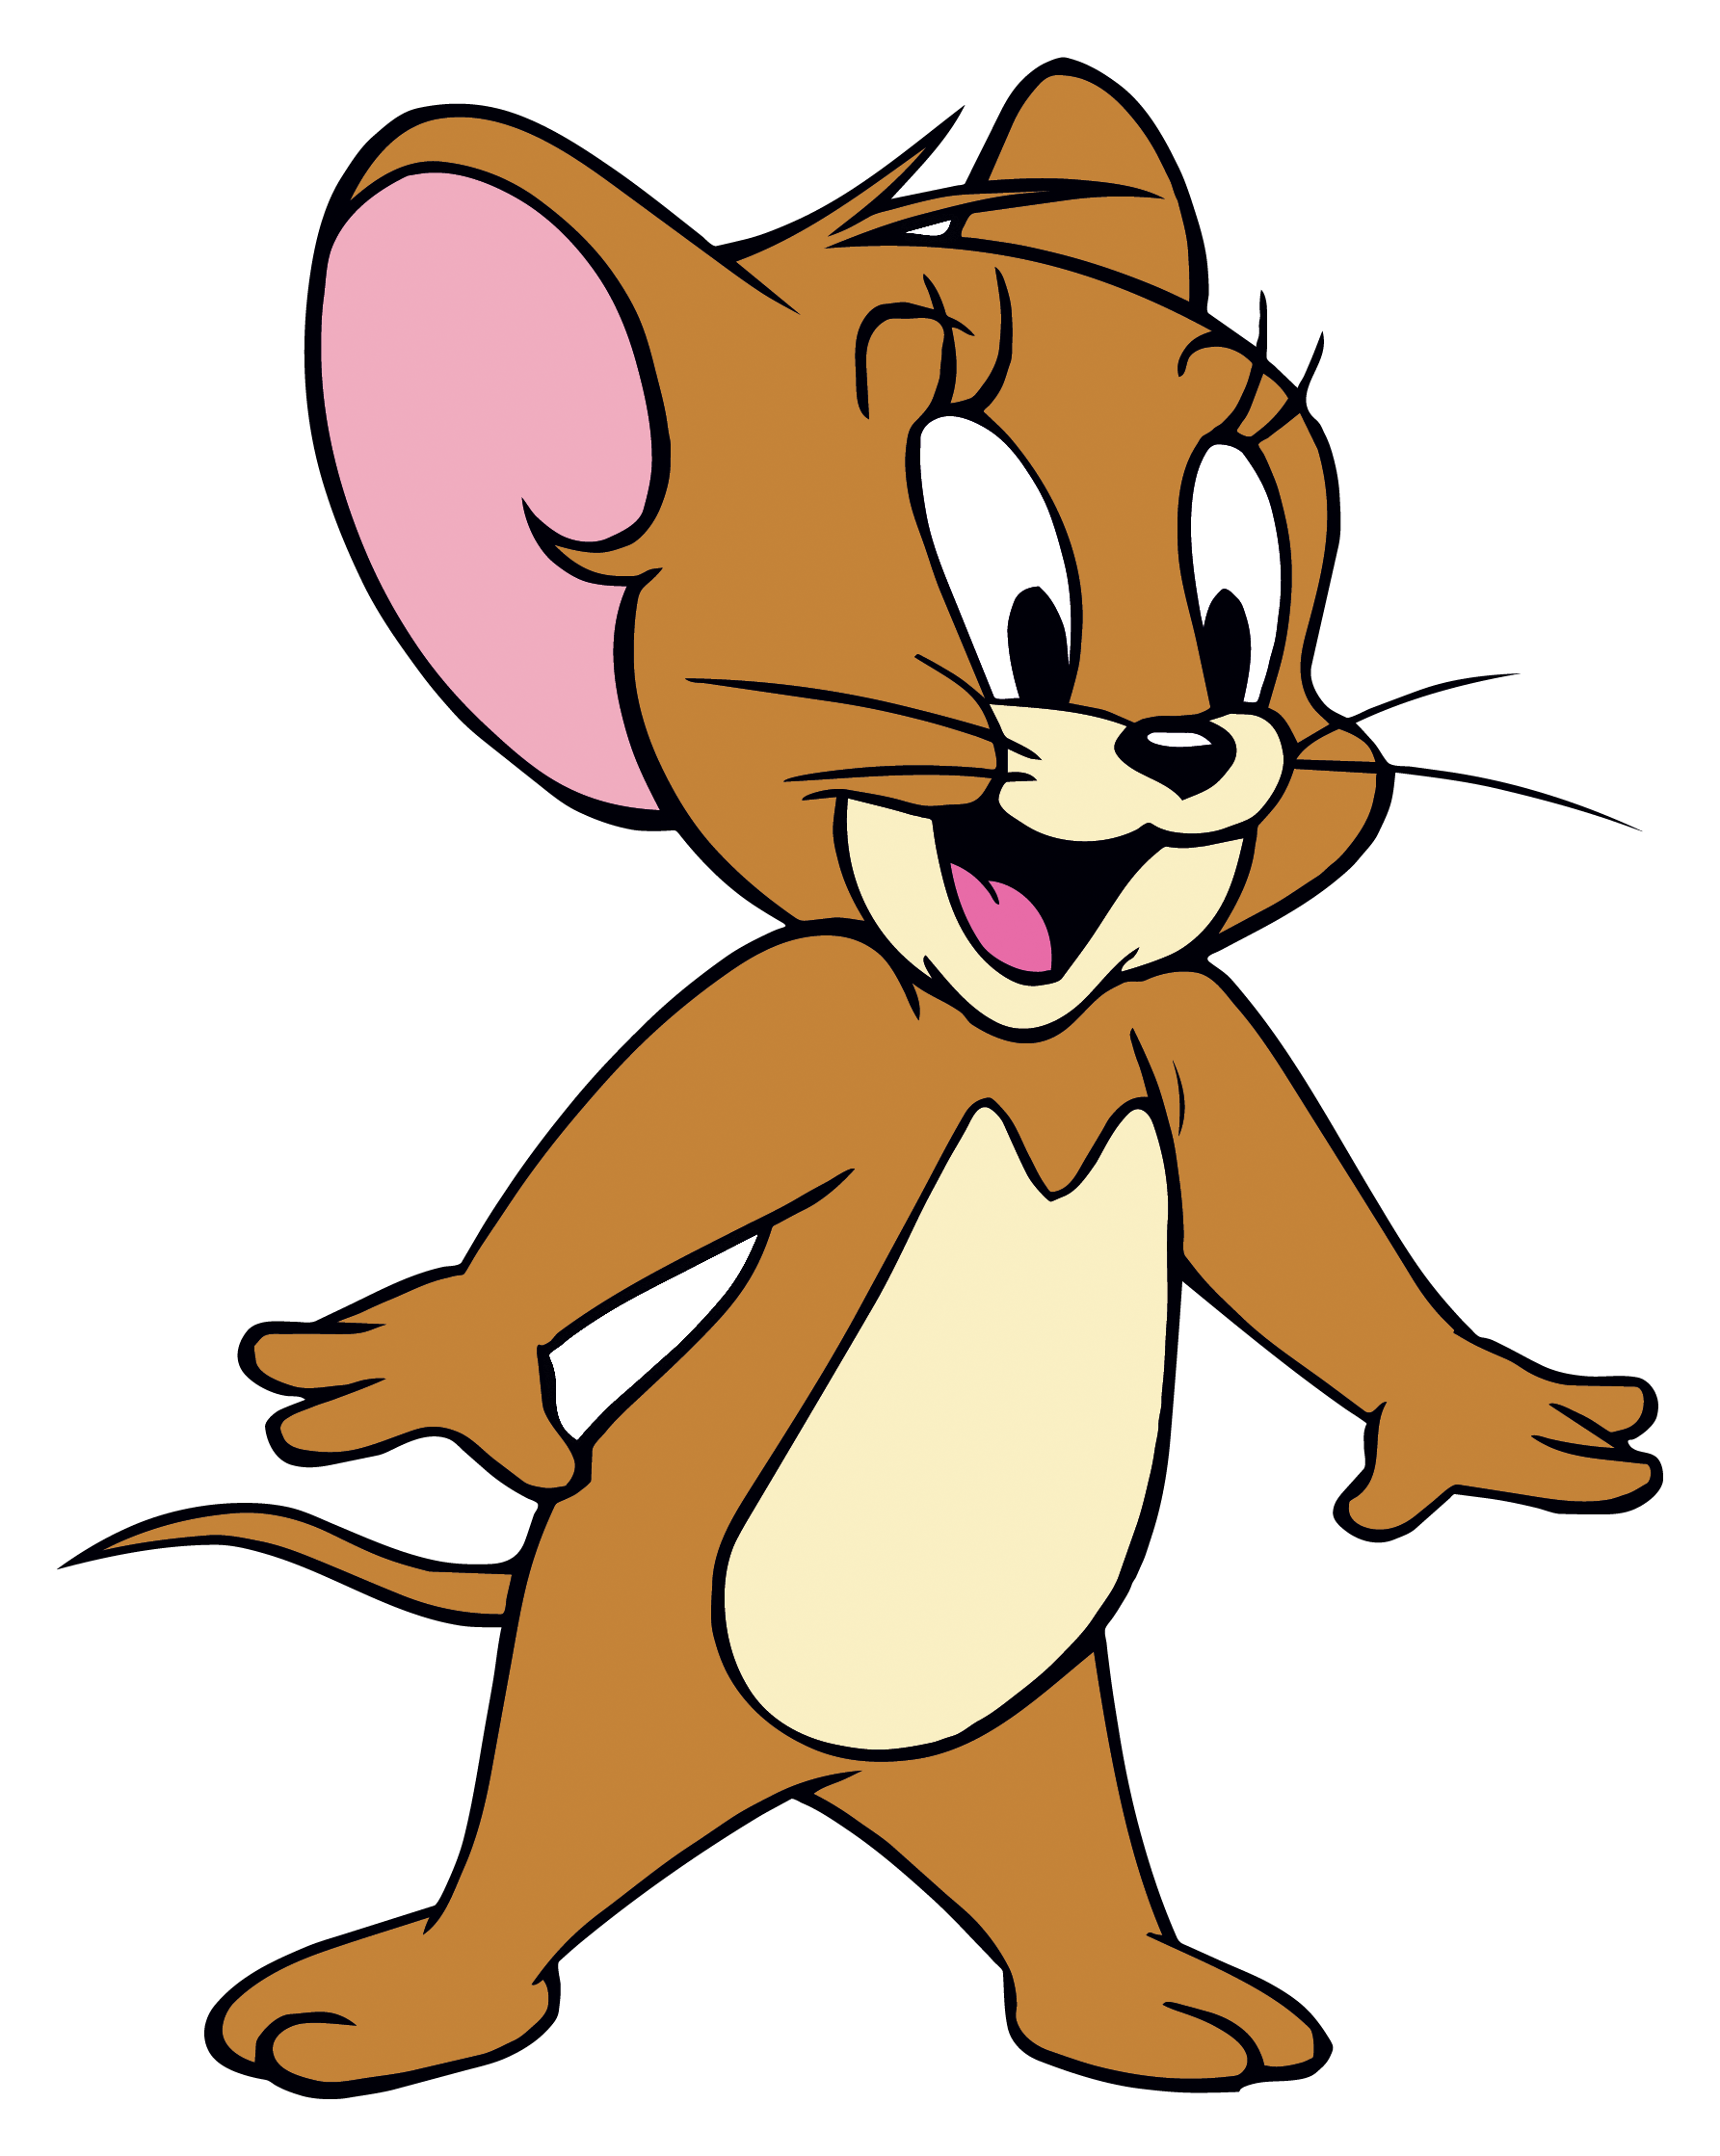 Jerry - Tom And Jerry PNG Image - PurePNG | Free transparent CC0 PNG ...